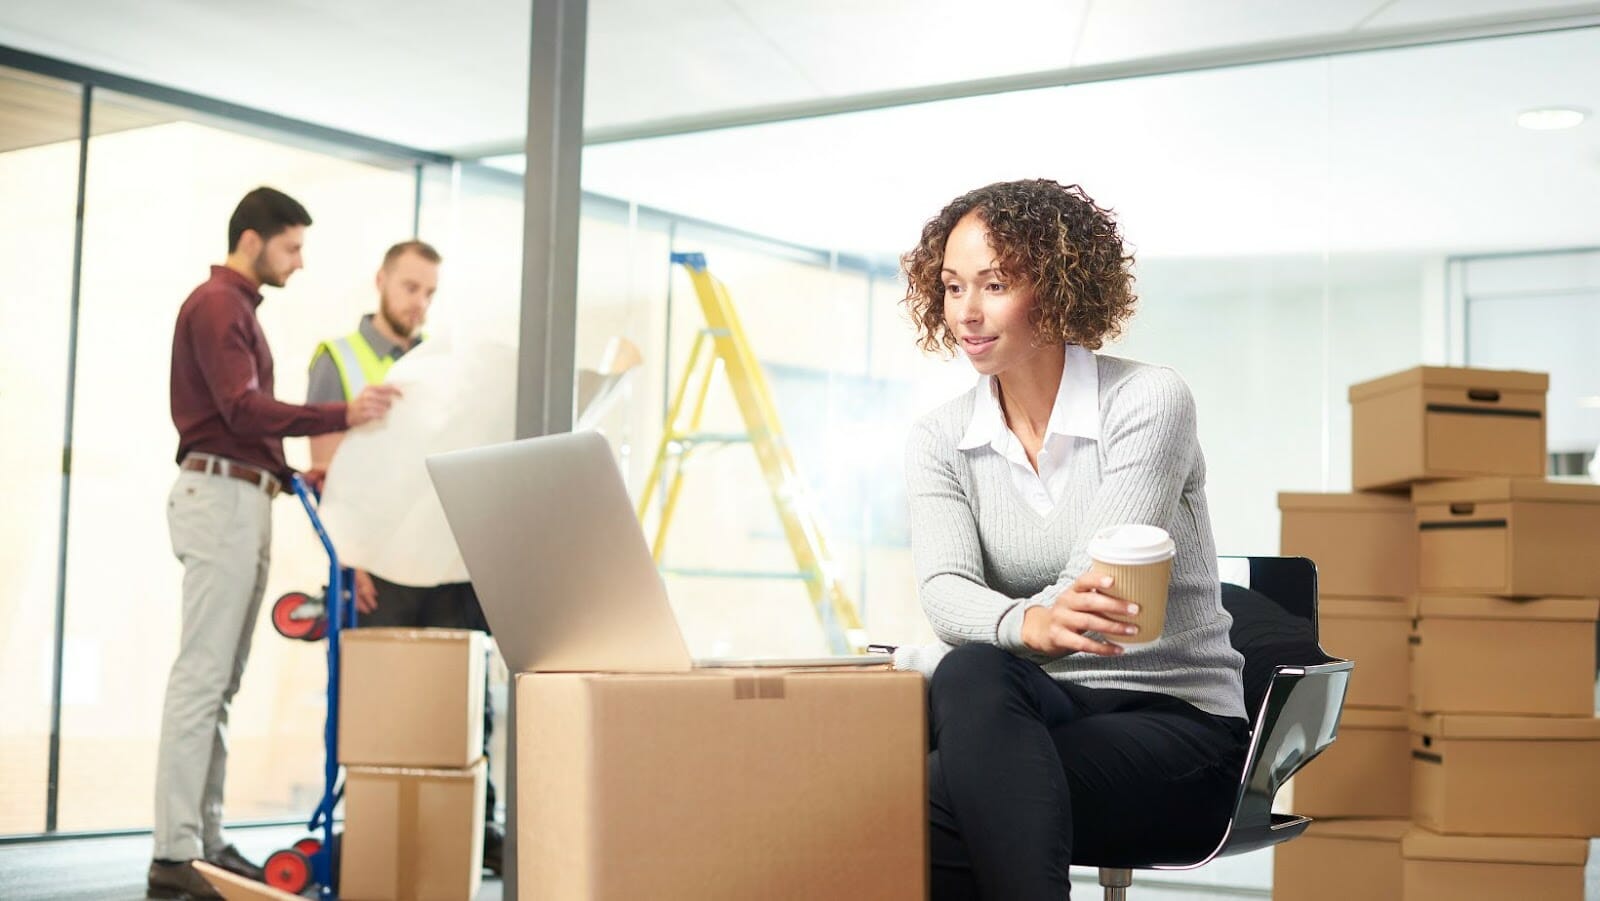 The Definitive Resource for Long-Distance Relocation Planning: Advice from the Industry’s Professionals